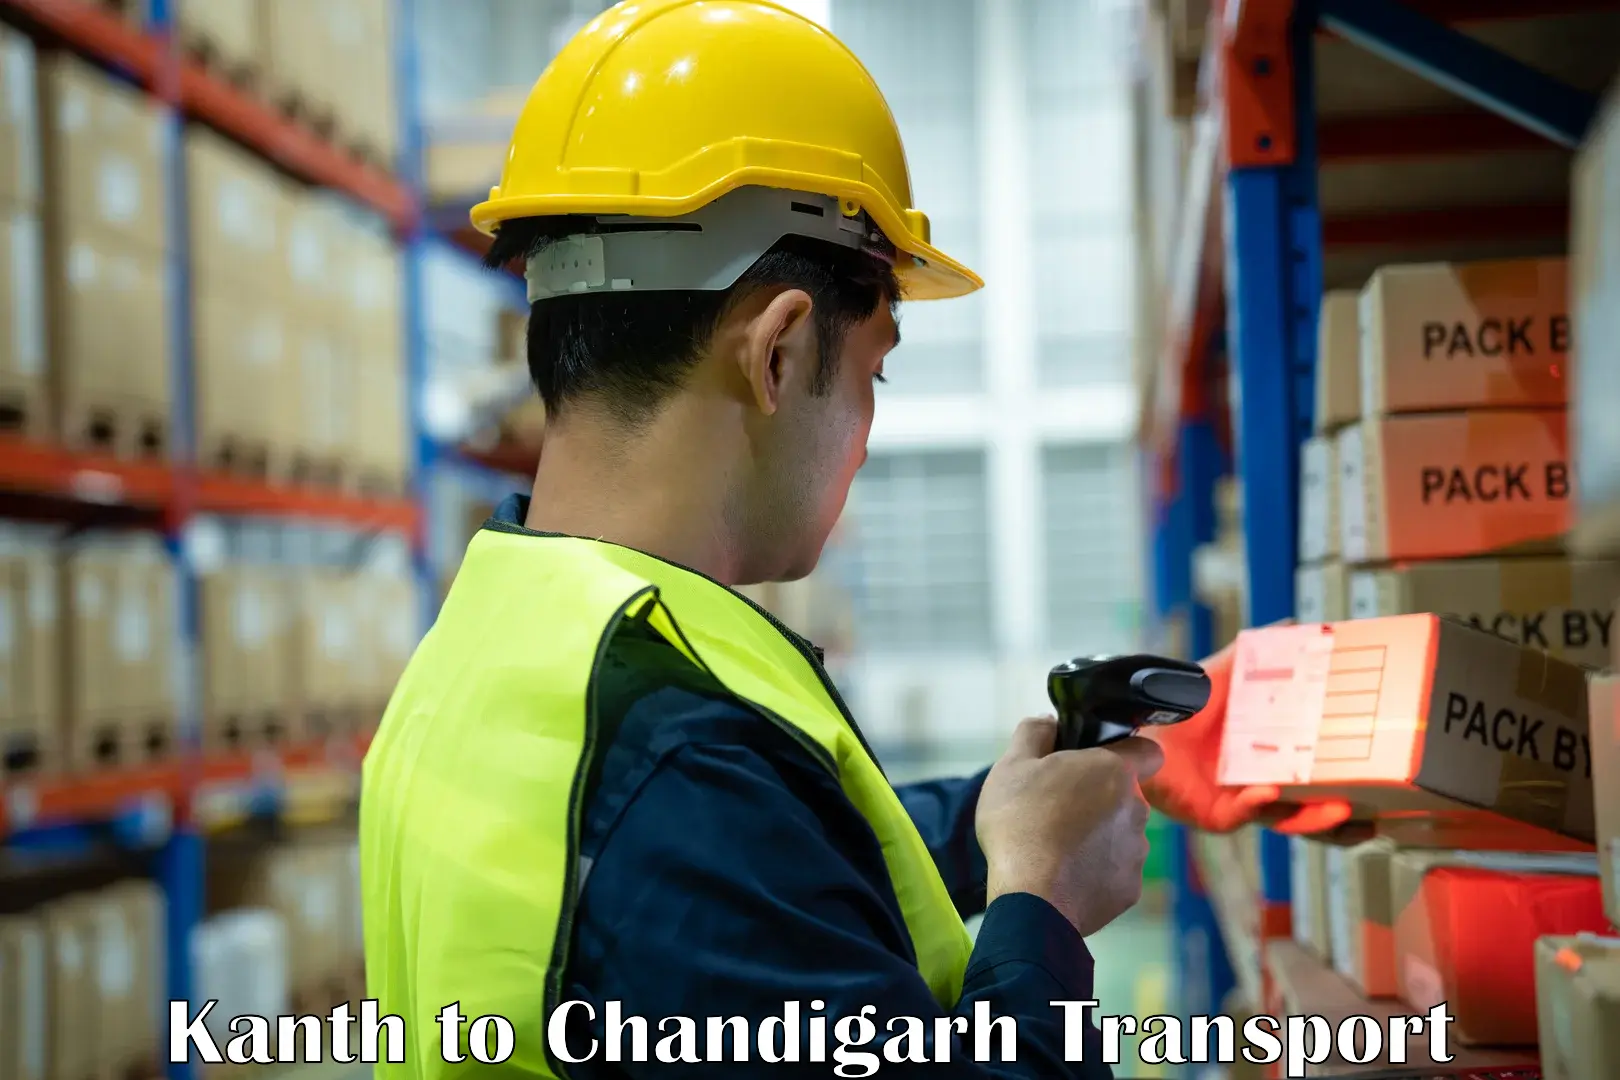 Land transport services Kanth to Chandigarh